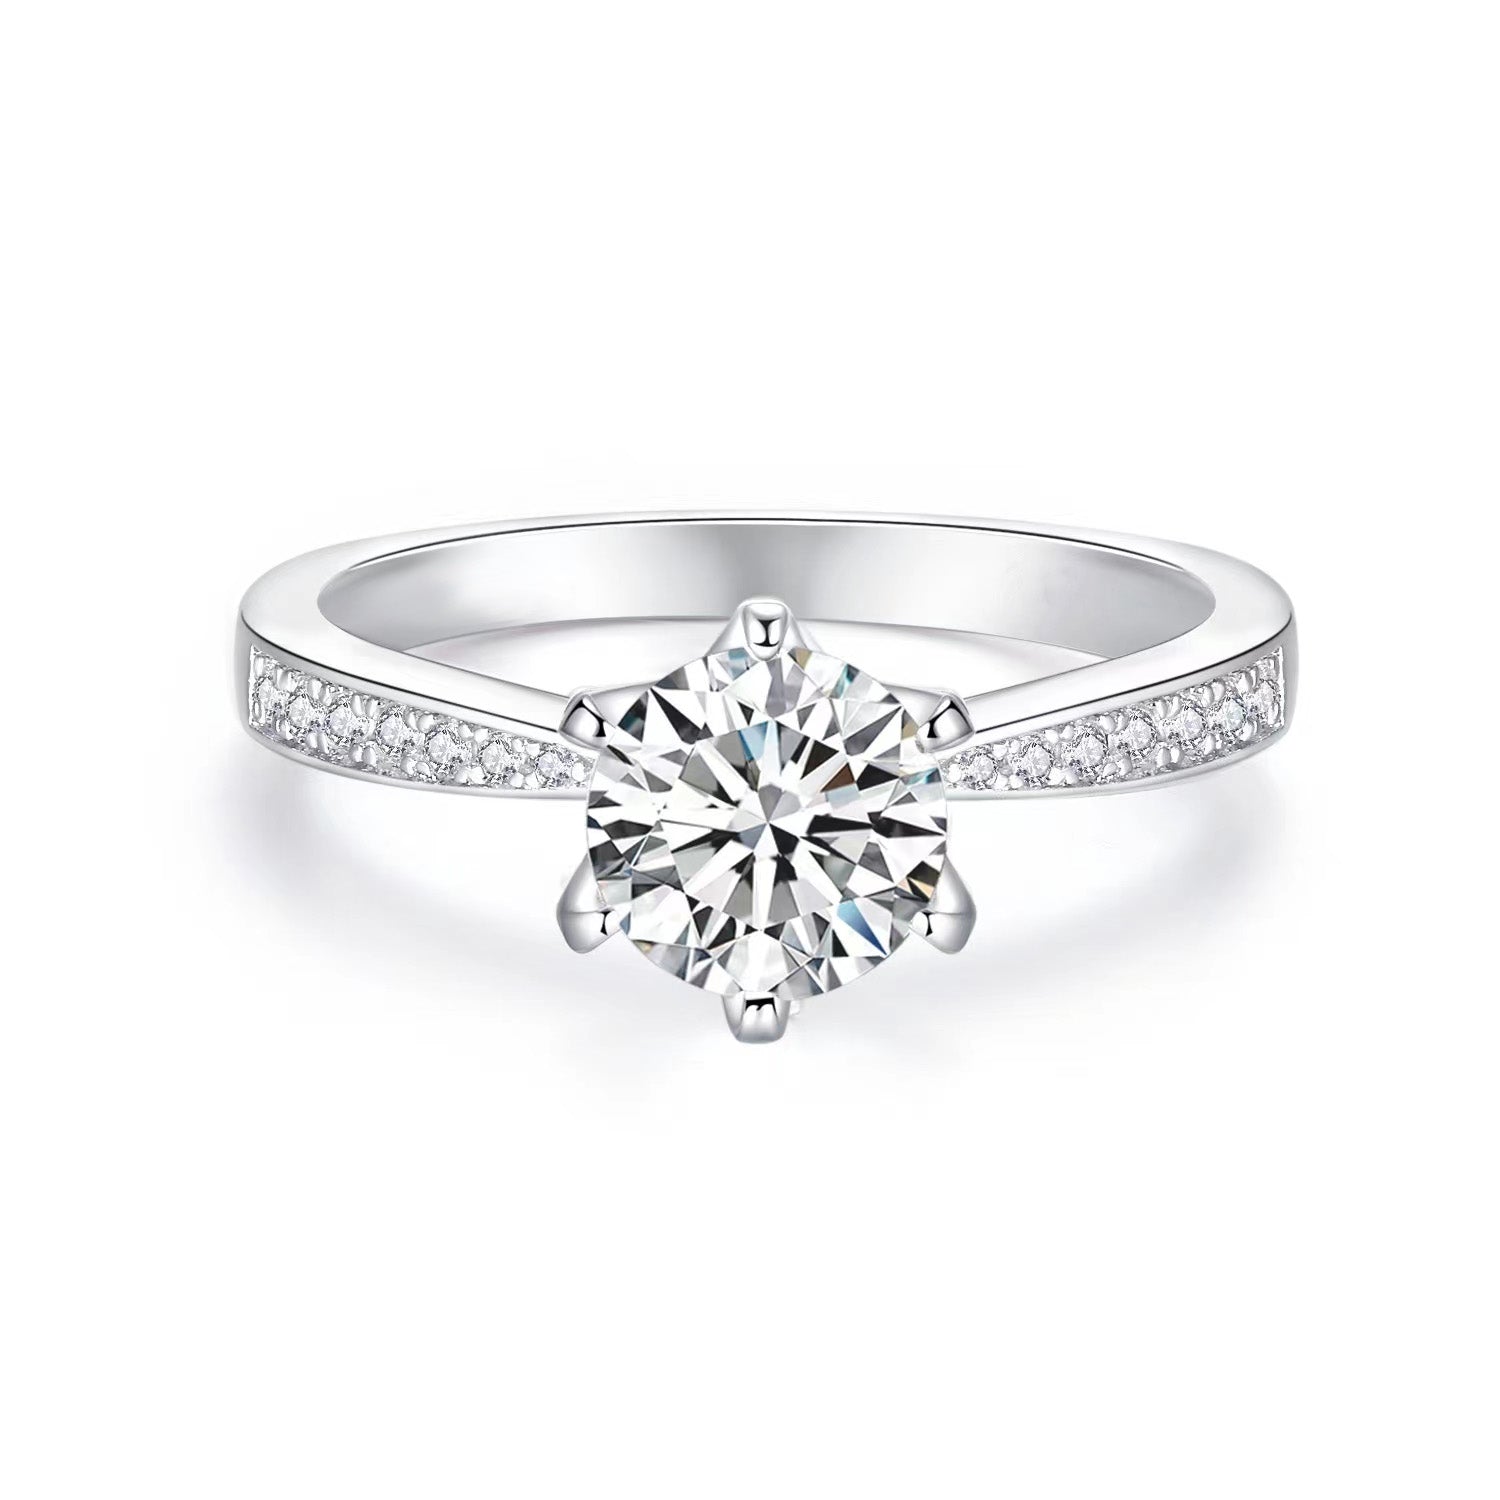 Classic Round Cut Moissanite Diamond Engagement Ring Sterling Silver